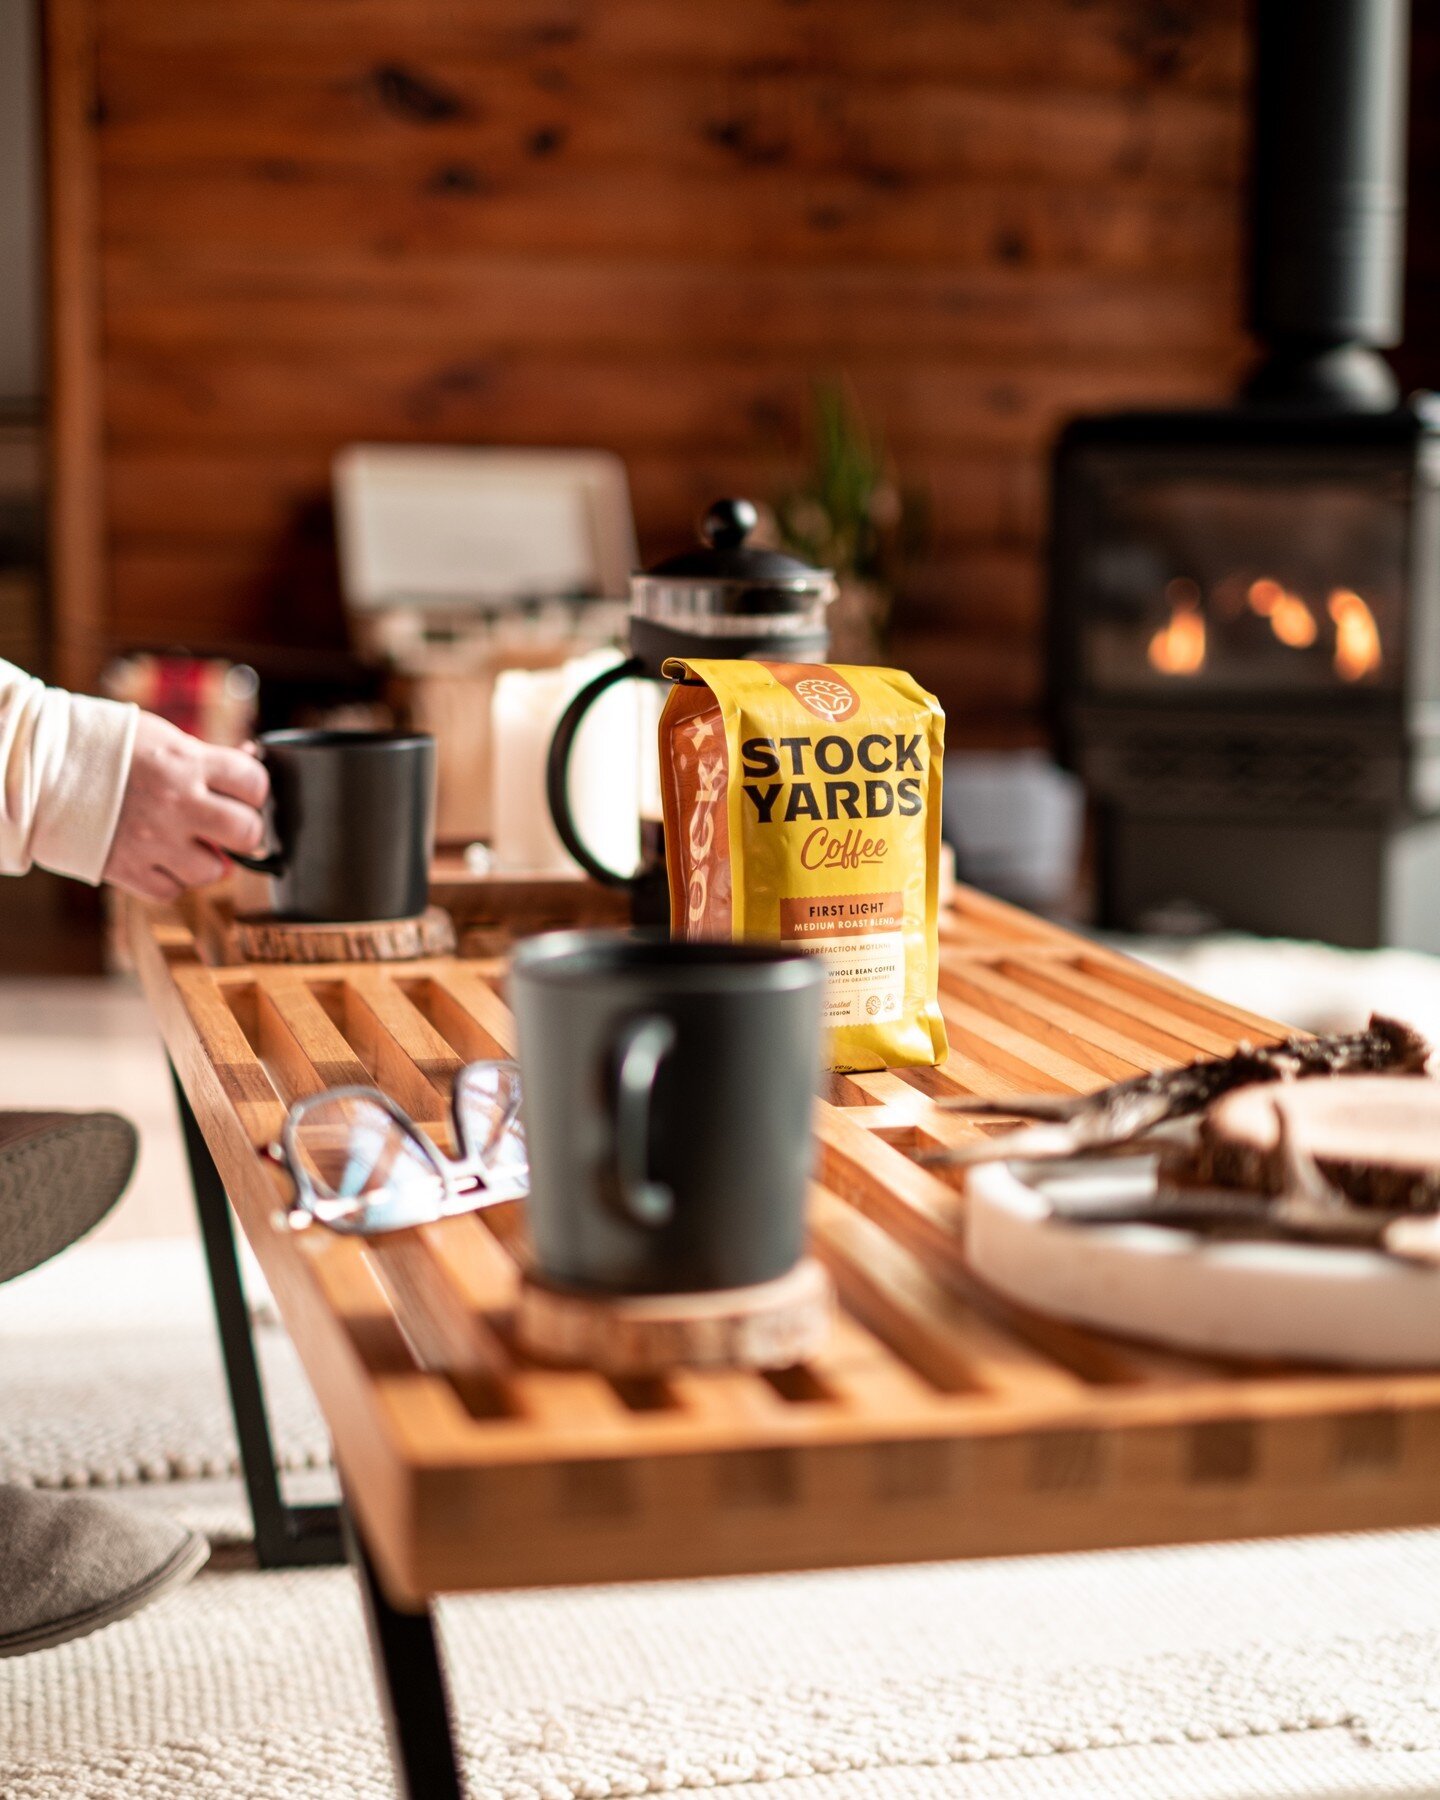 Goto the cottage with your favourite coffee... everything tastes better at the cottage! #YUM #getcaffeinated #coffee #delicious #cottagevibes

shot at @visitblackriverhaus